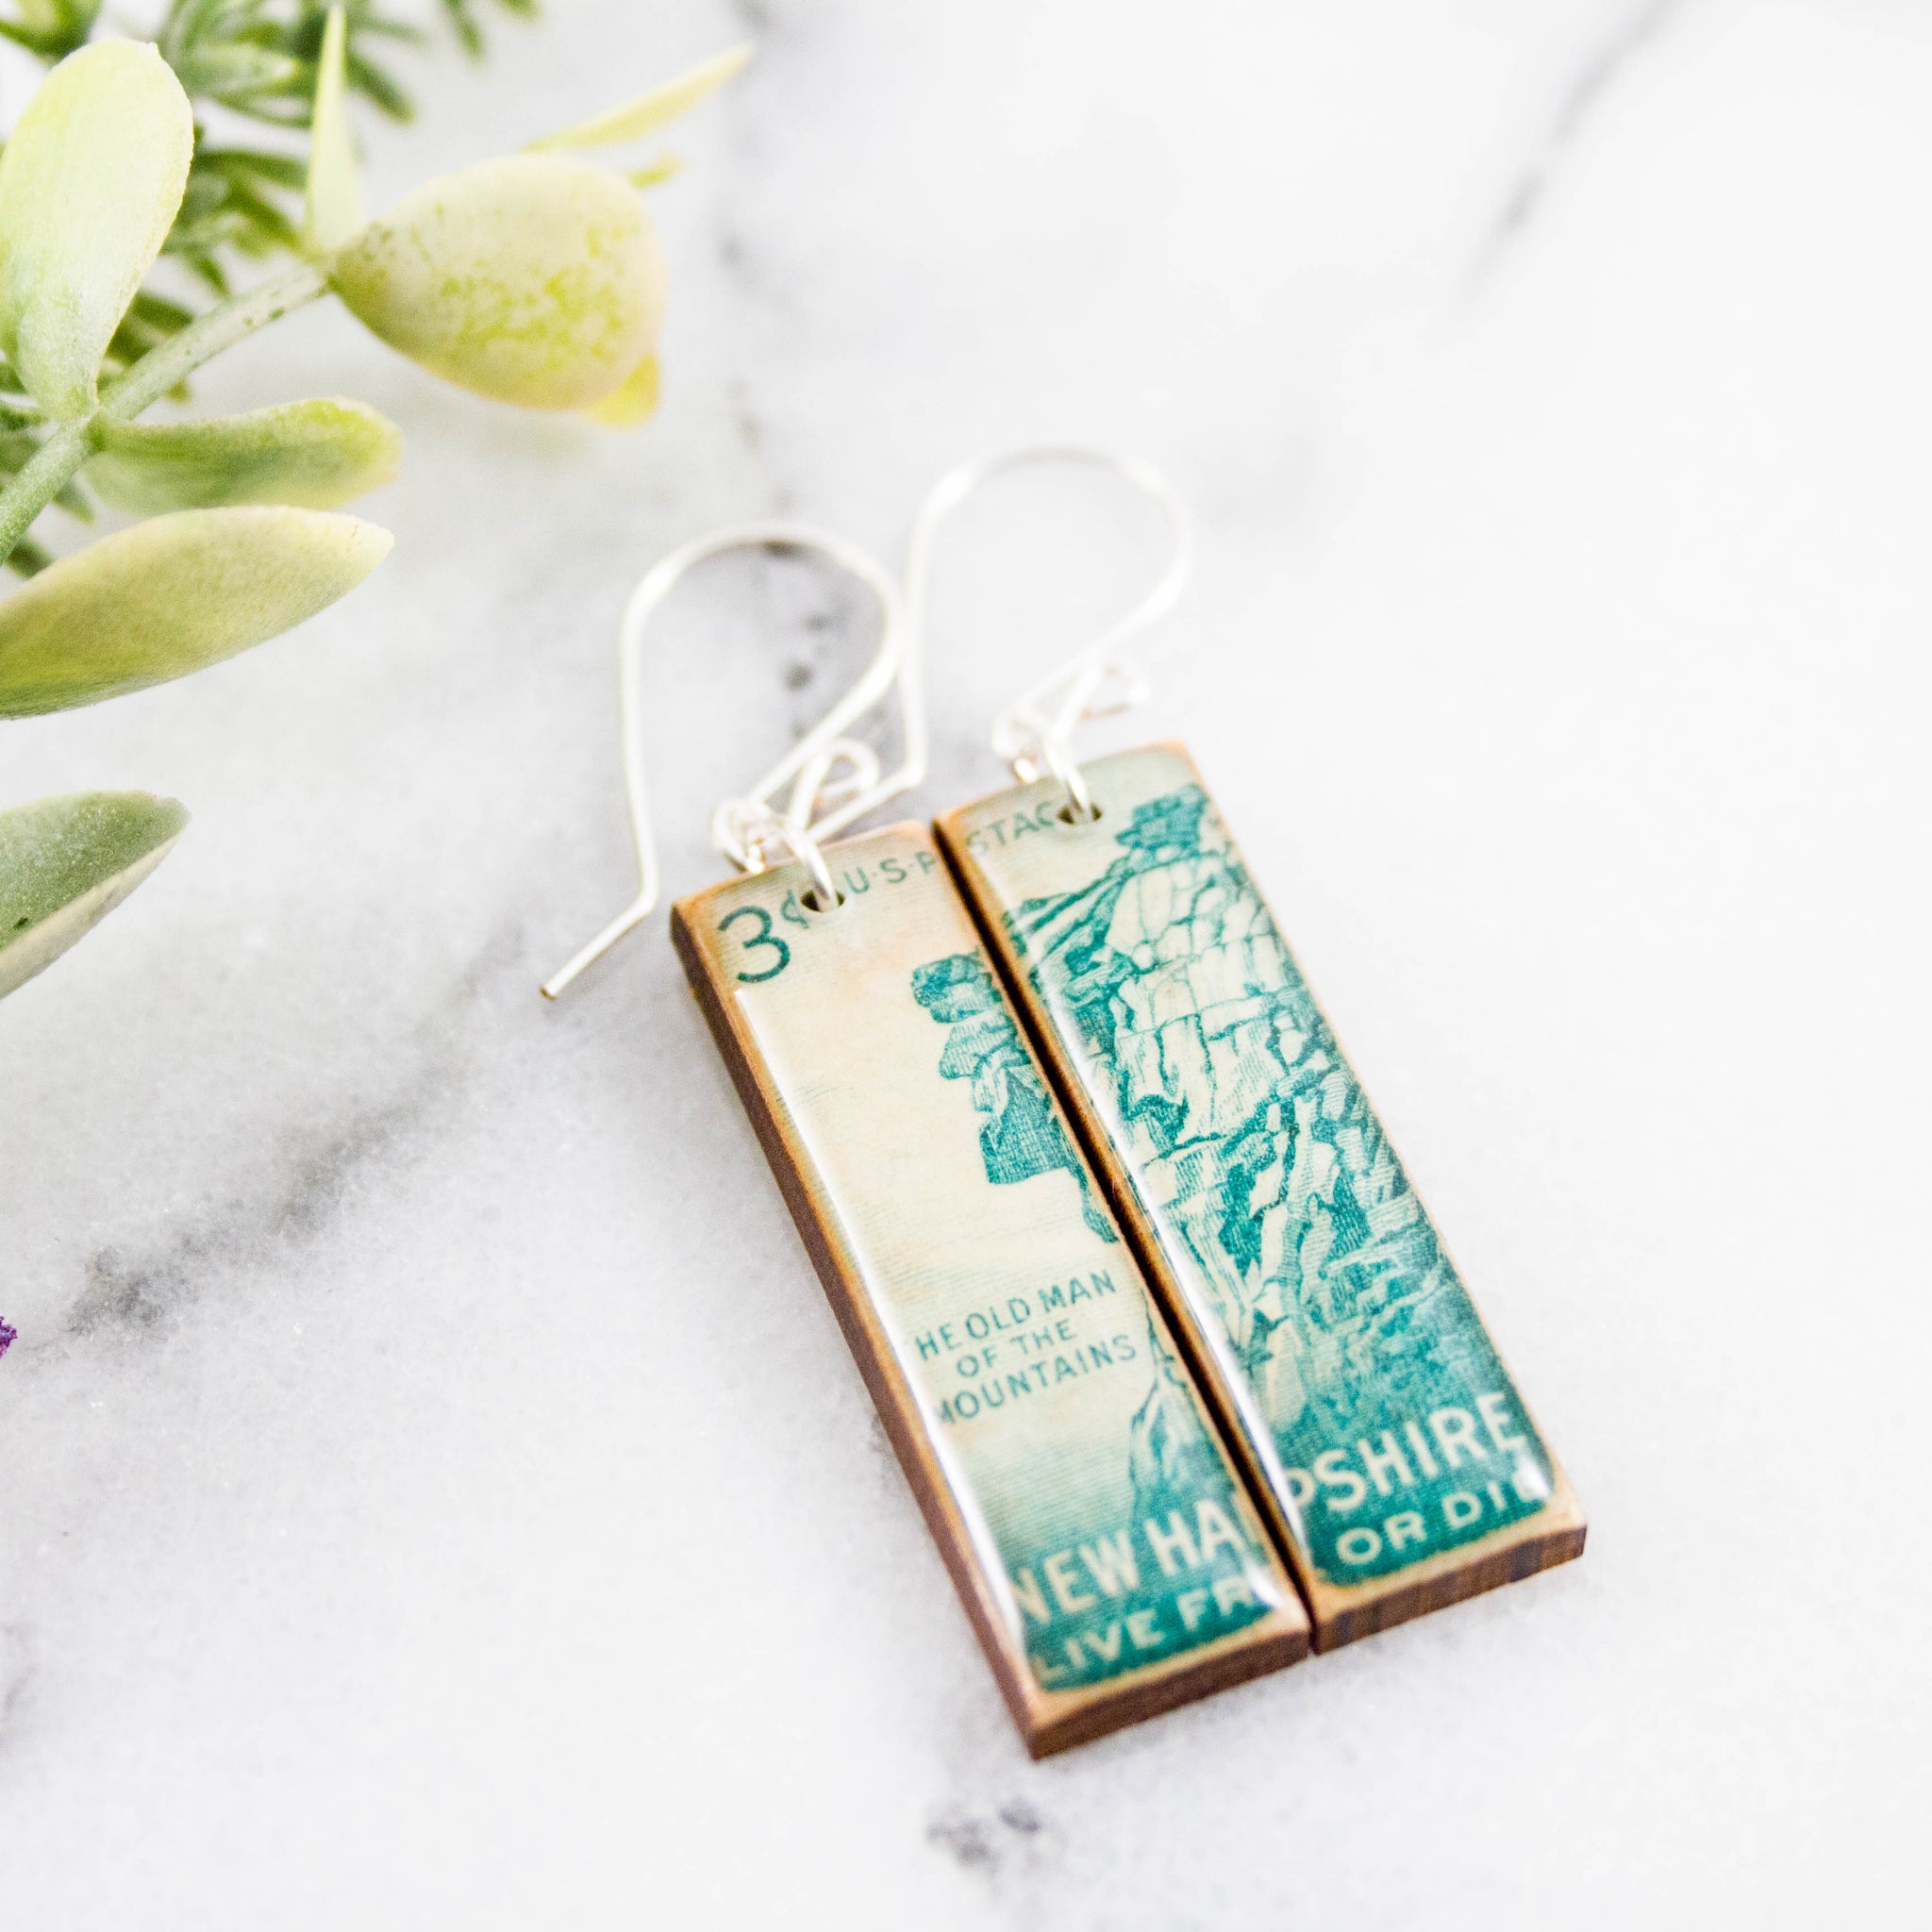 NEW HAMPSHIRE- Vintage Postage Stamp Earrings